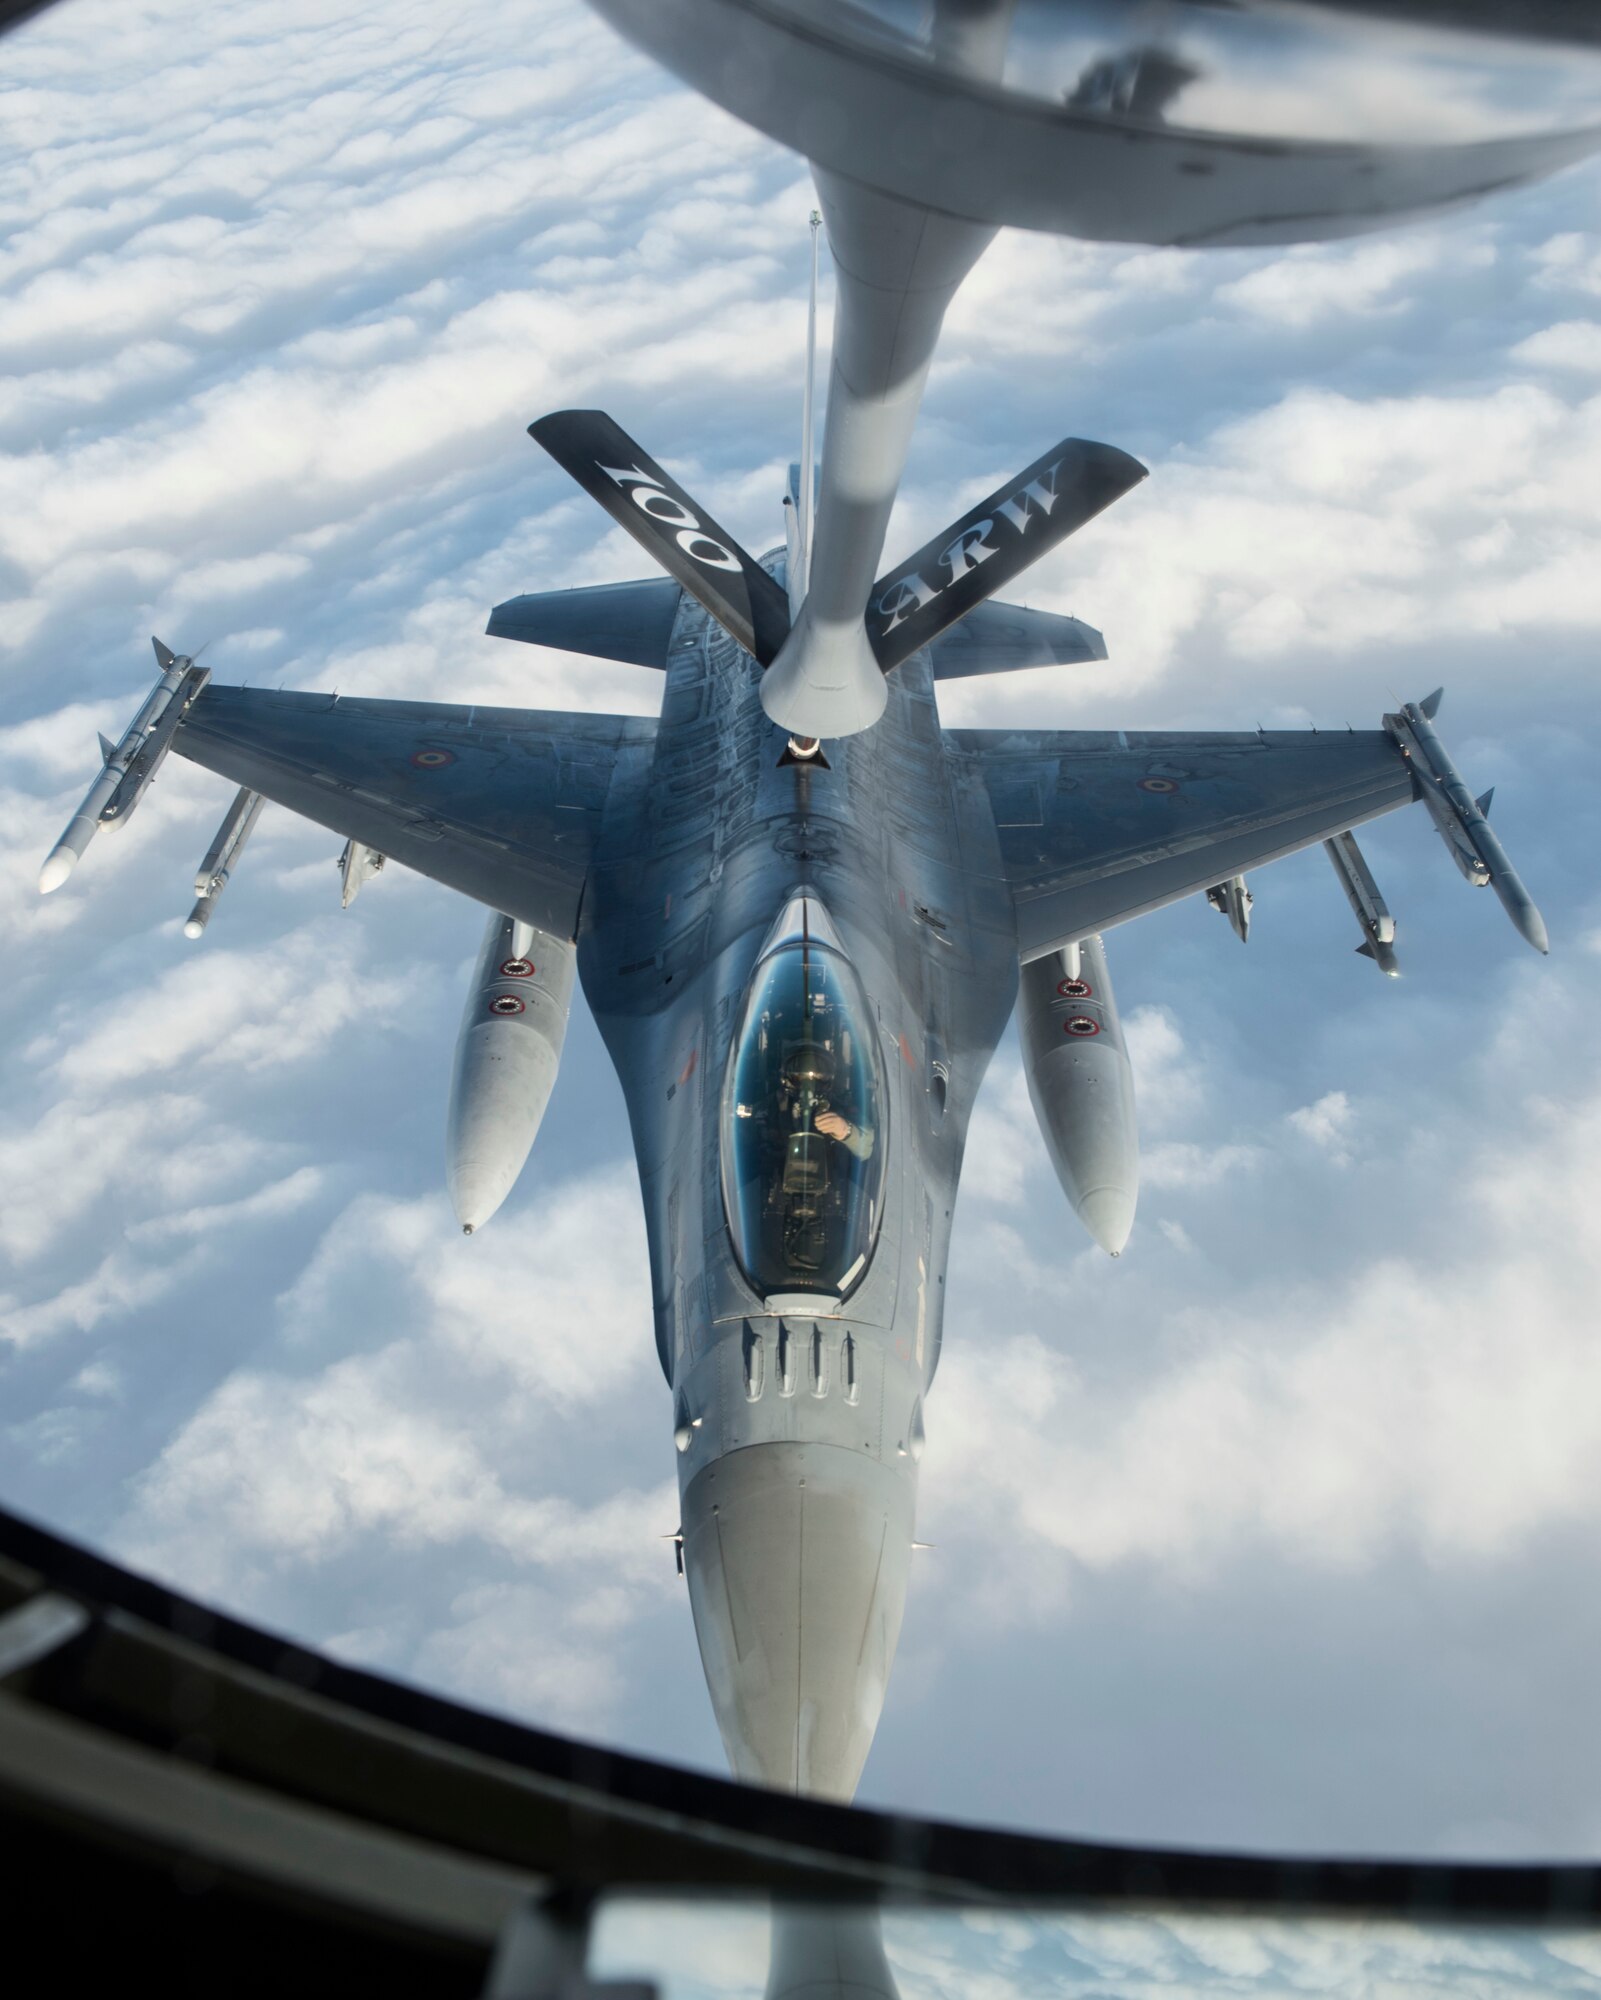 A Belgian F-16 Fighting Falcon receives fuel from a U.S. Air Force KC-135 Stratotanker during Exercise Trident Juncture 18, in Swedish airspace, Oct. 30, 2018. The exercise is the largest NATO exercise since 2002, and includes more than 50,000 military members from 31 countries. The exercise provides U.S. forces with unique opportunities to train with NATO allies and partners. (U.S. Air Force photo by Senior Airman Luke Milano)(U.S. Air Force photo by Senior Airman Luke Milano)